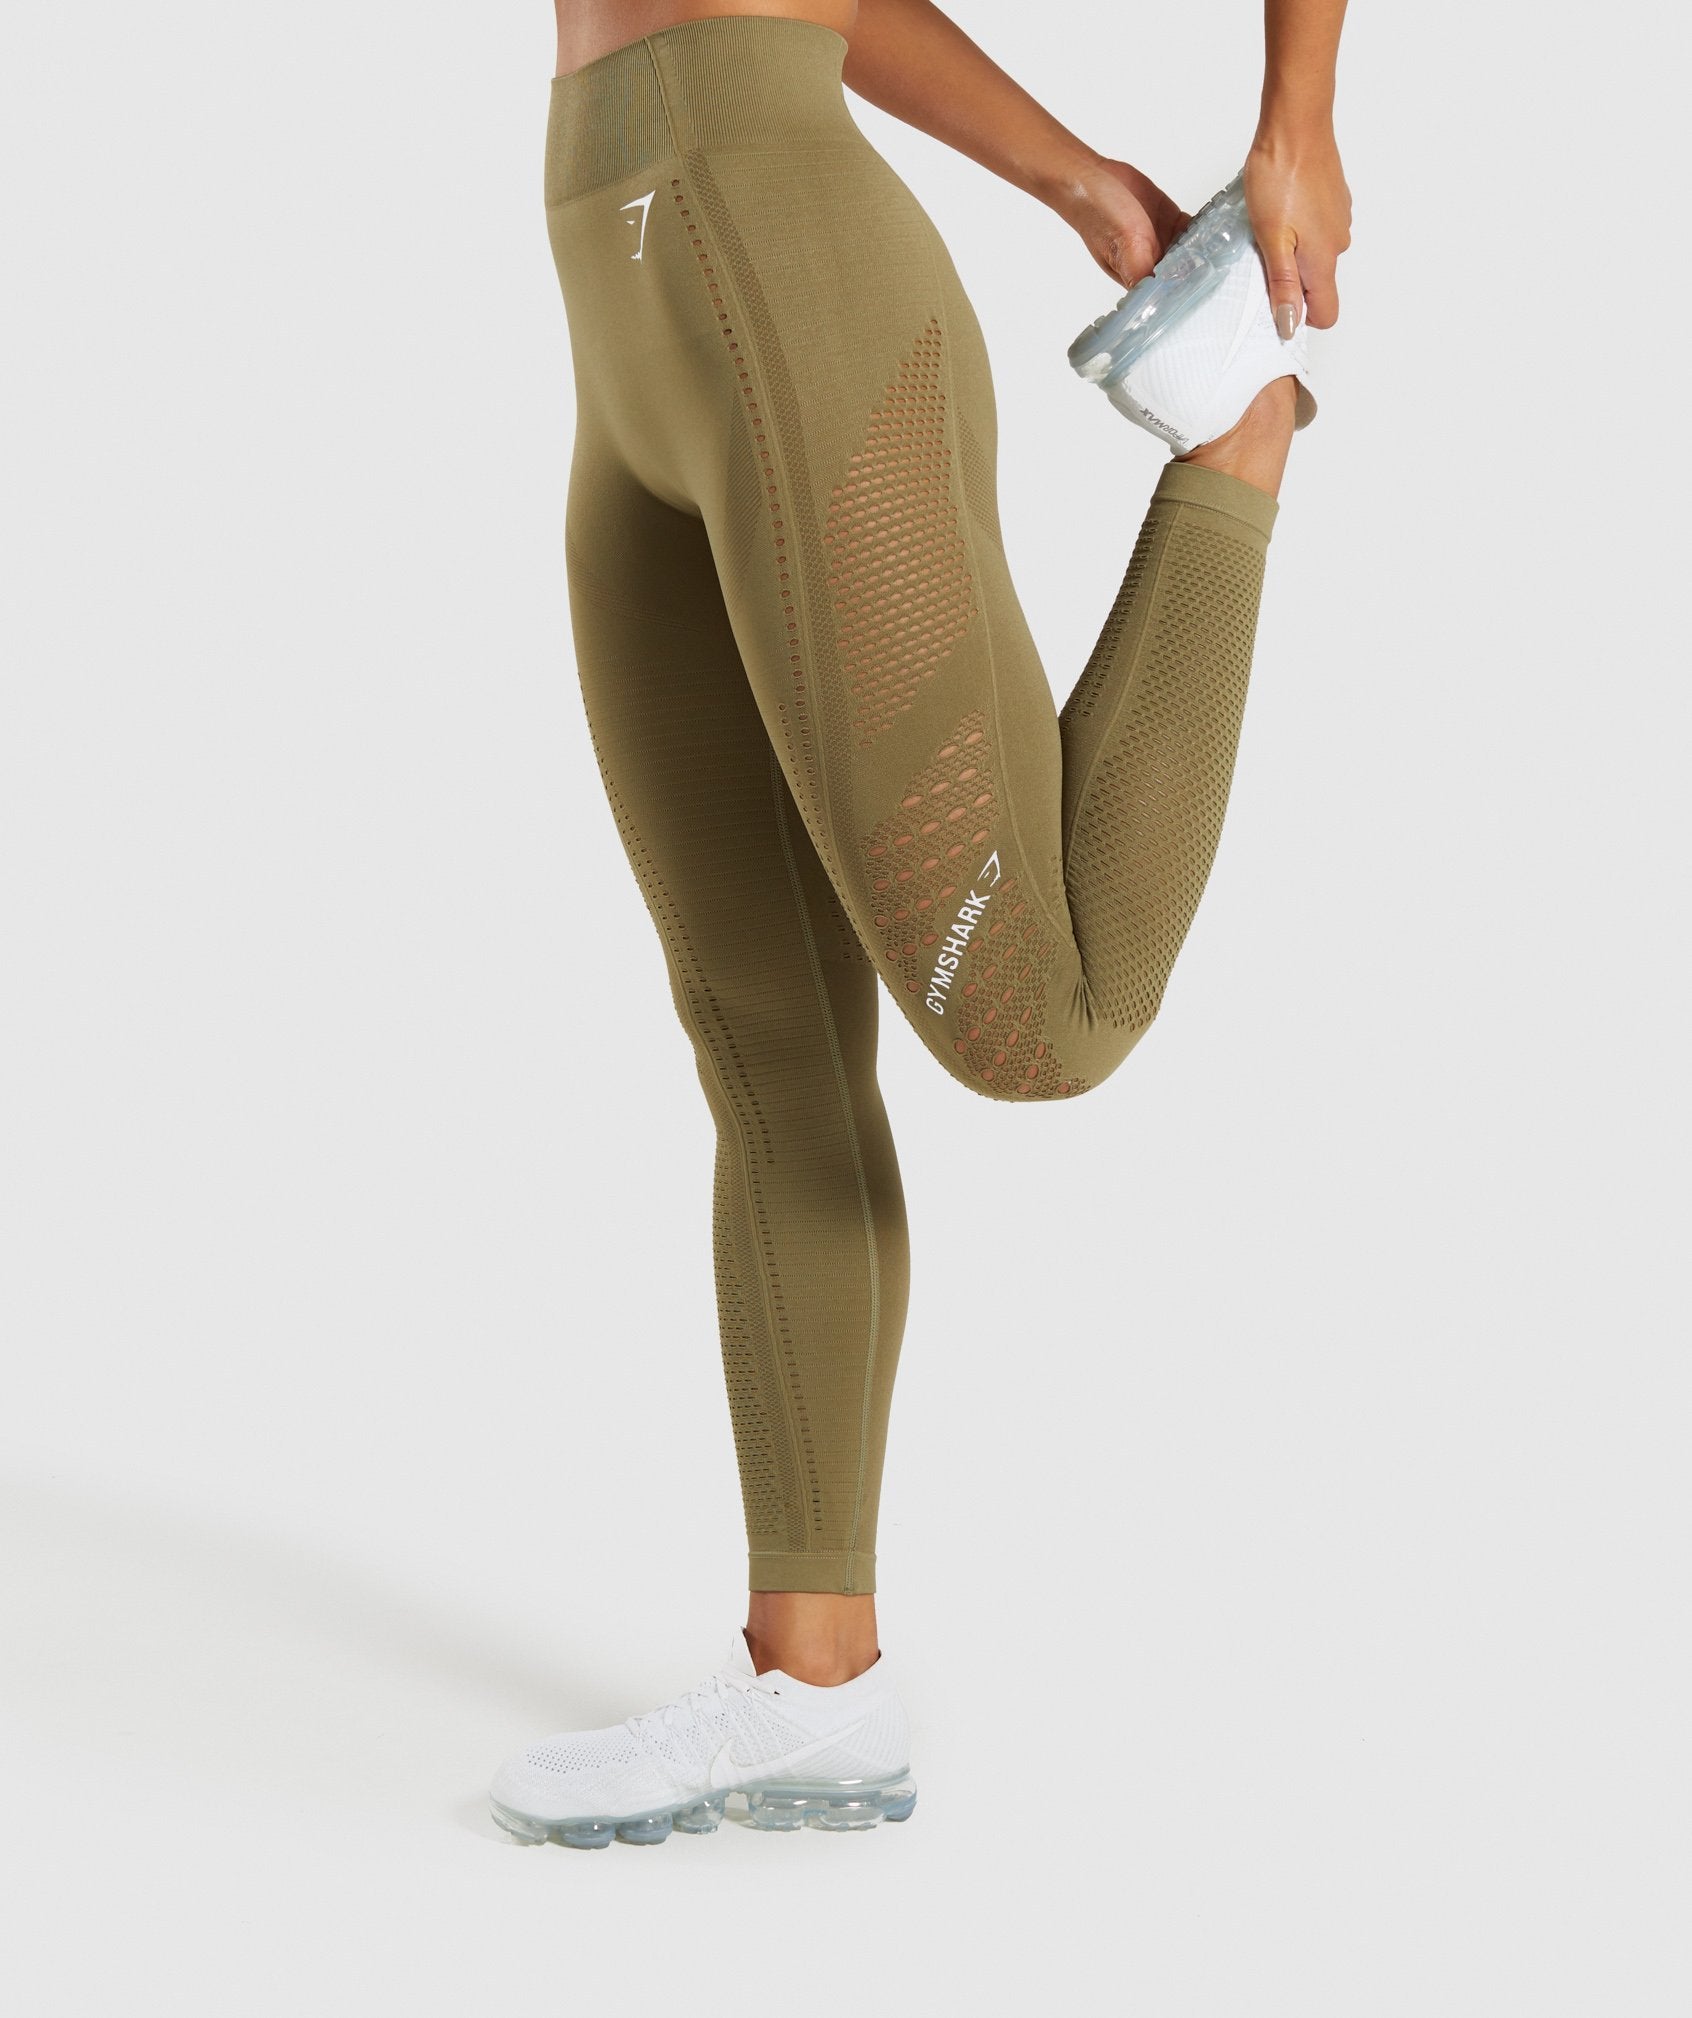 Flawless Knit Tights in Khaki - view 3